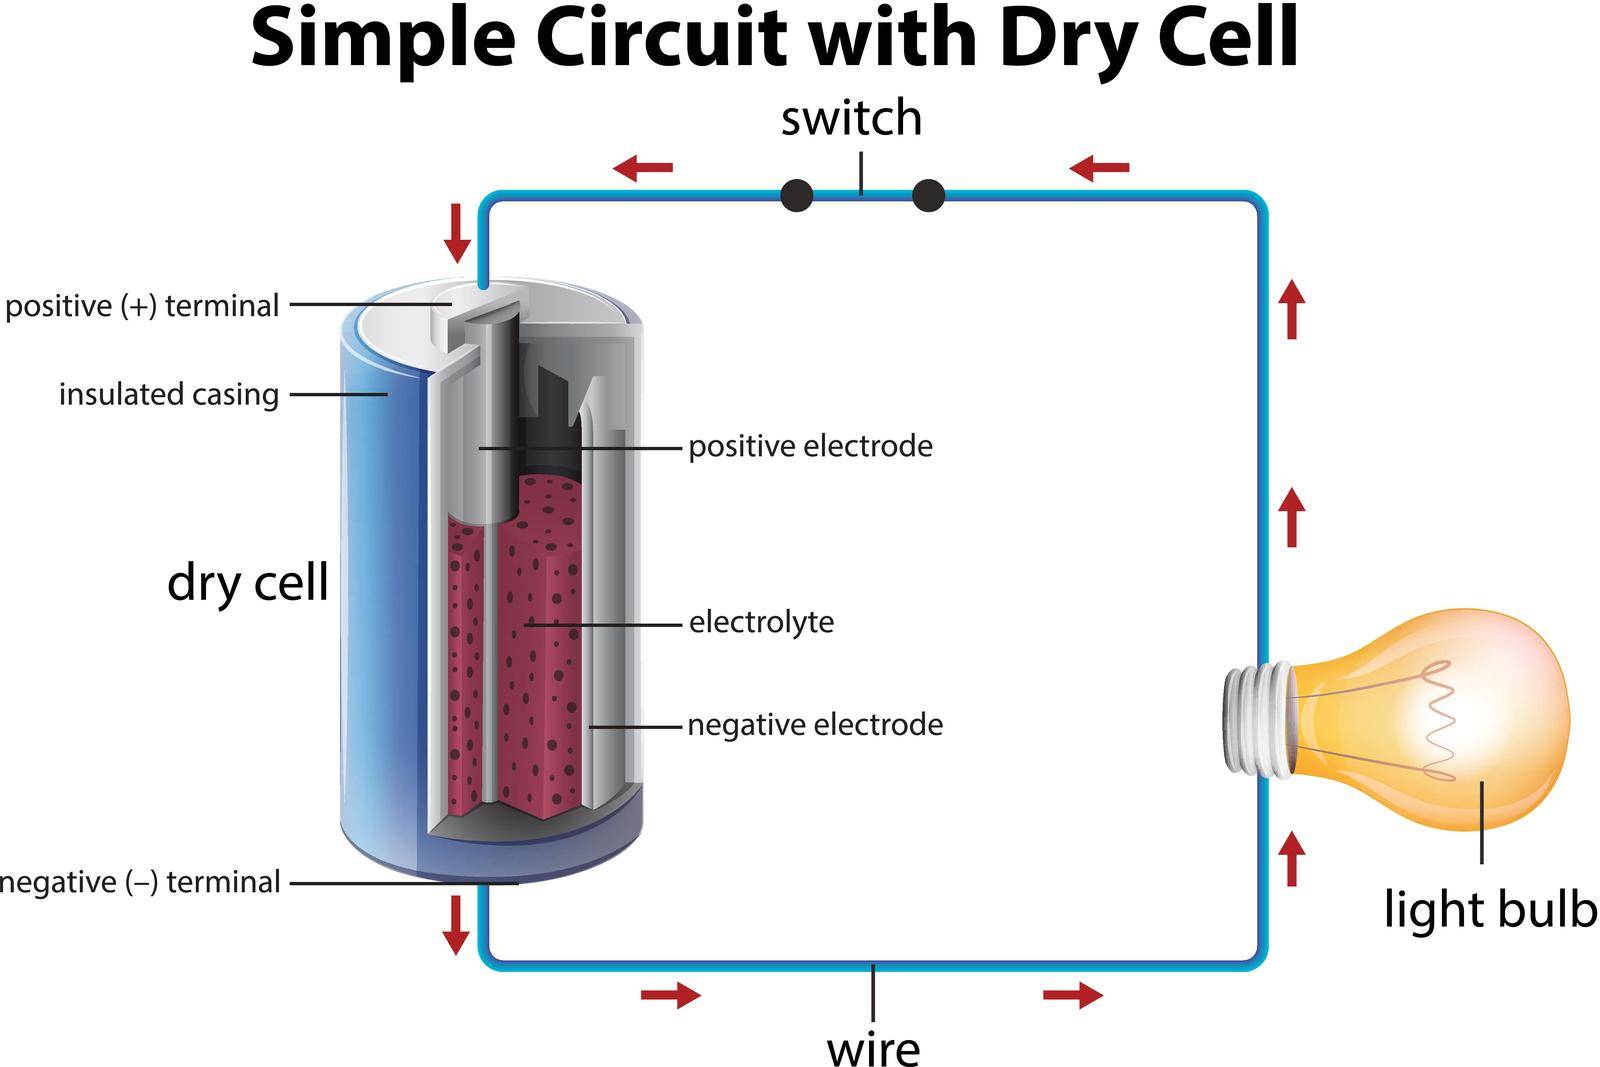 Diagram showing simple circuit with dry cell by iimages